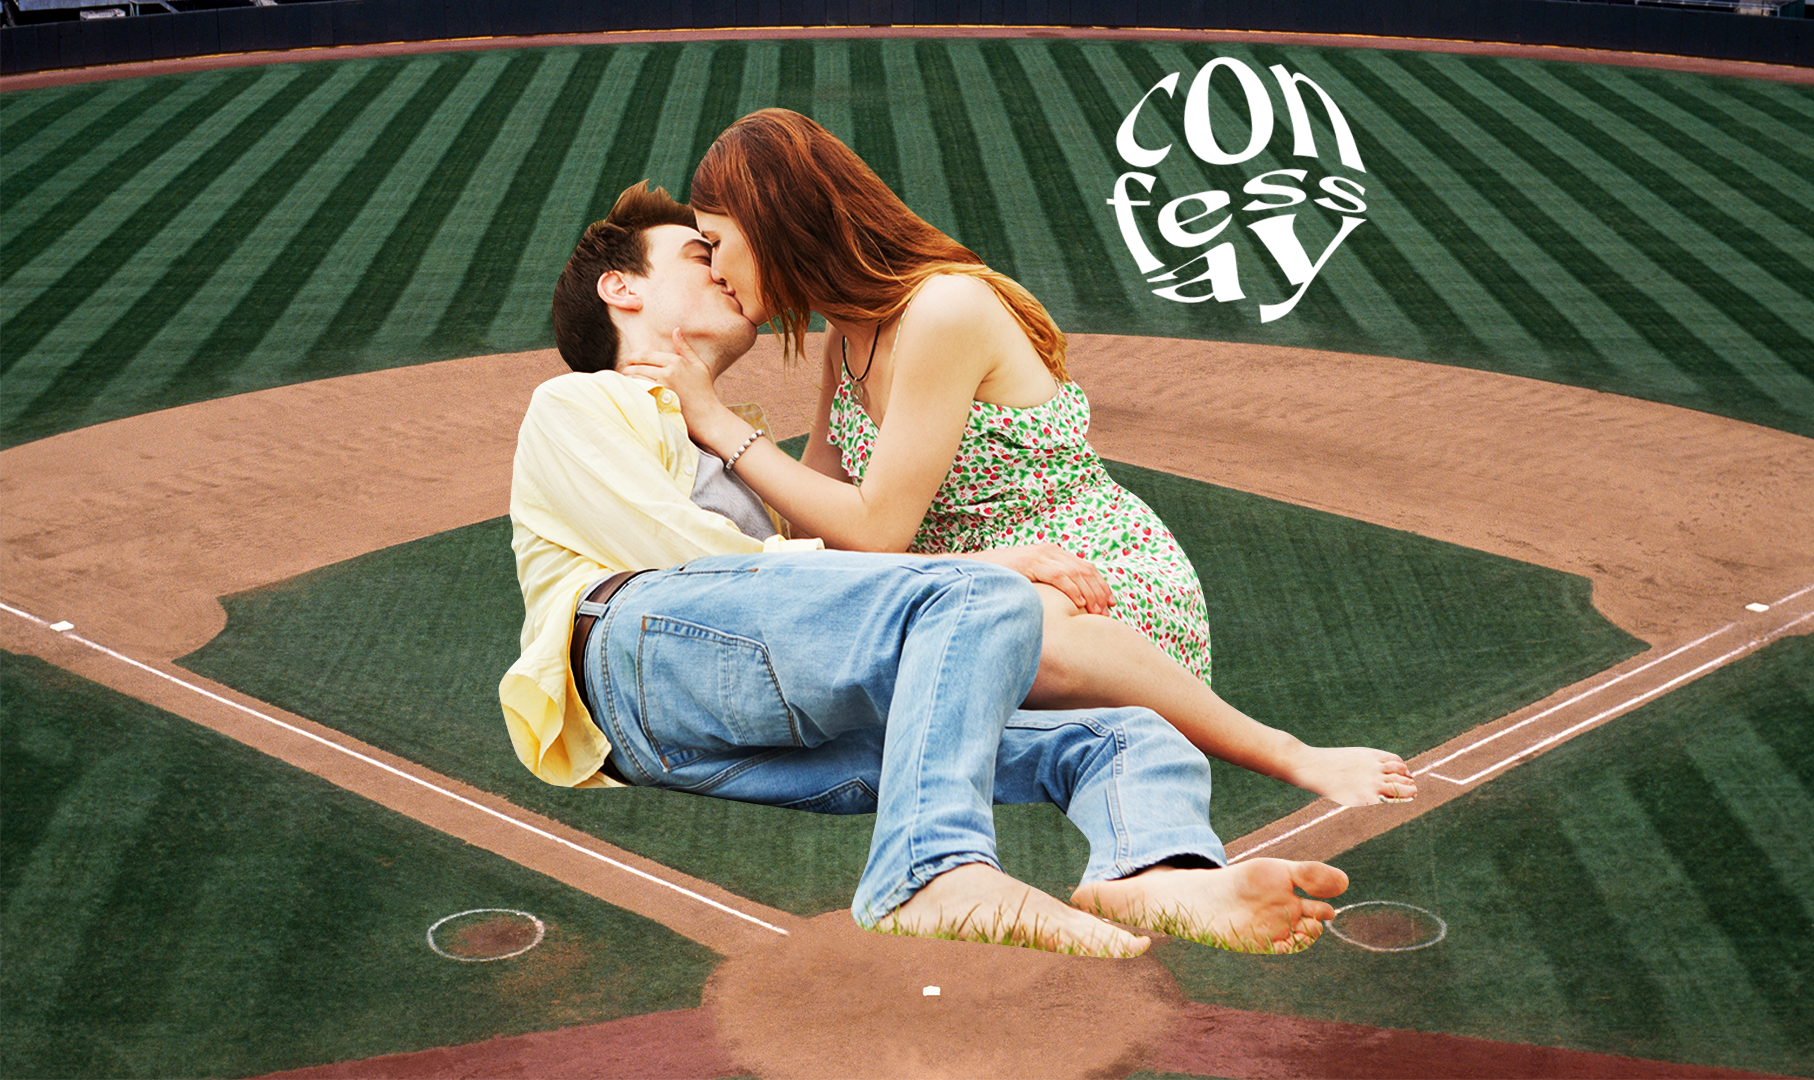 I Had Sex With My High School Crush on the Baseball Field image